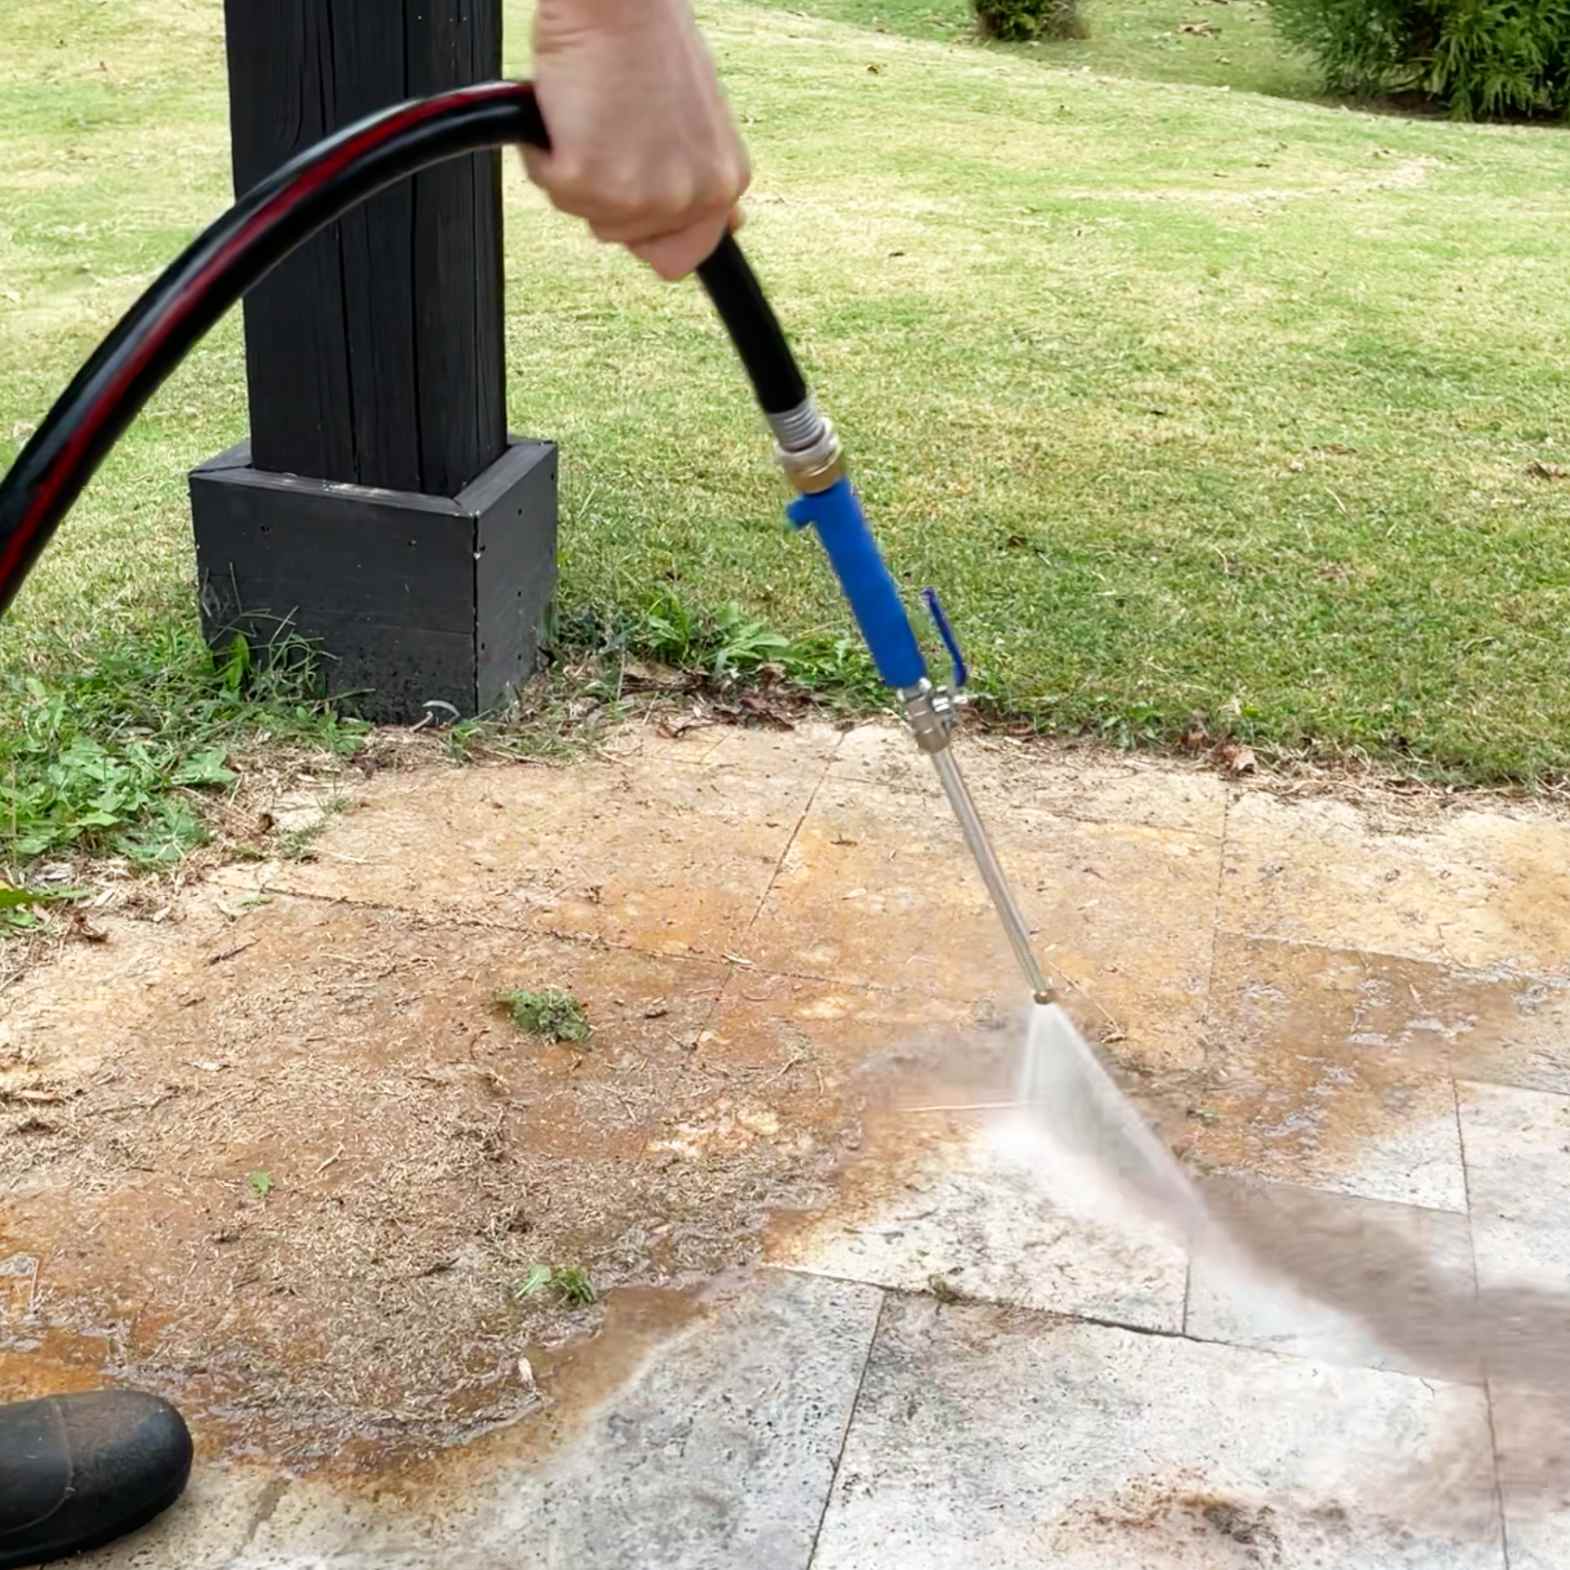 JetNozzle: A no-pressure-washer pressure washer that won’t cost an arm and a leg